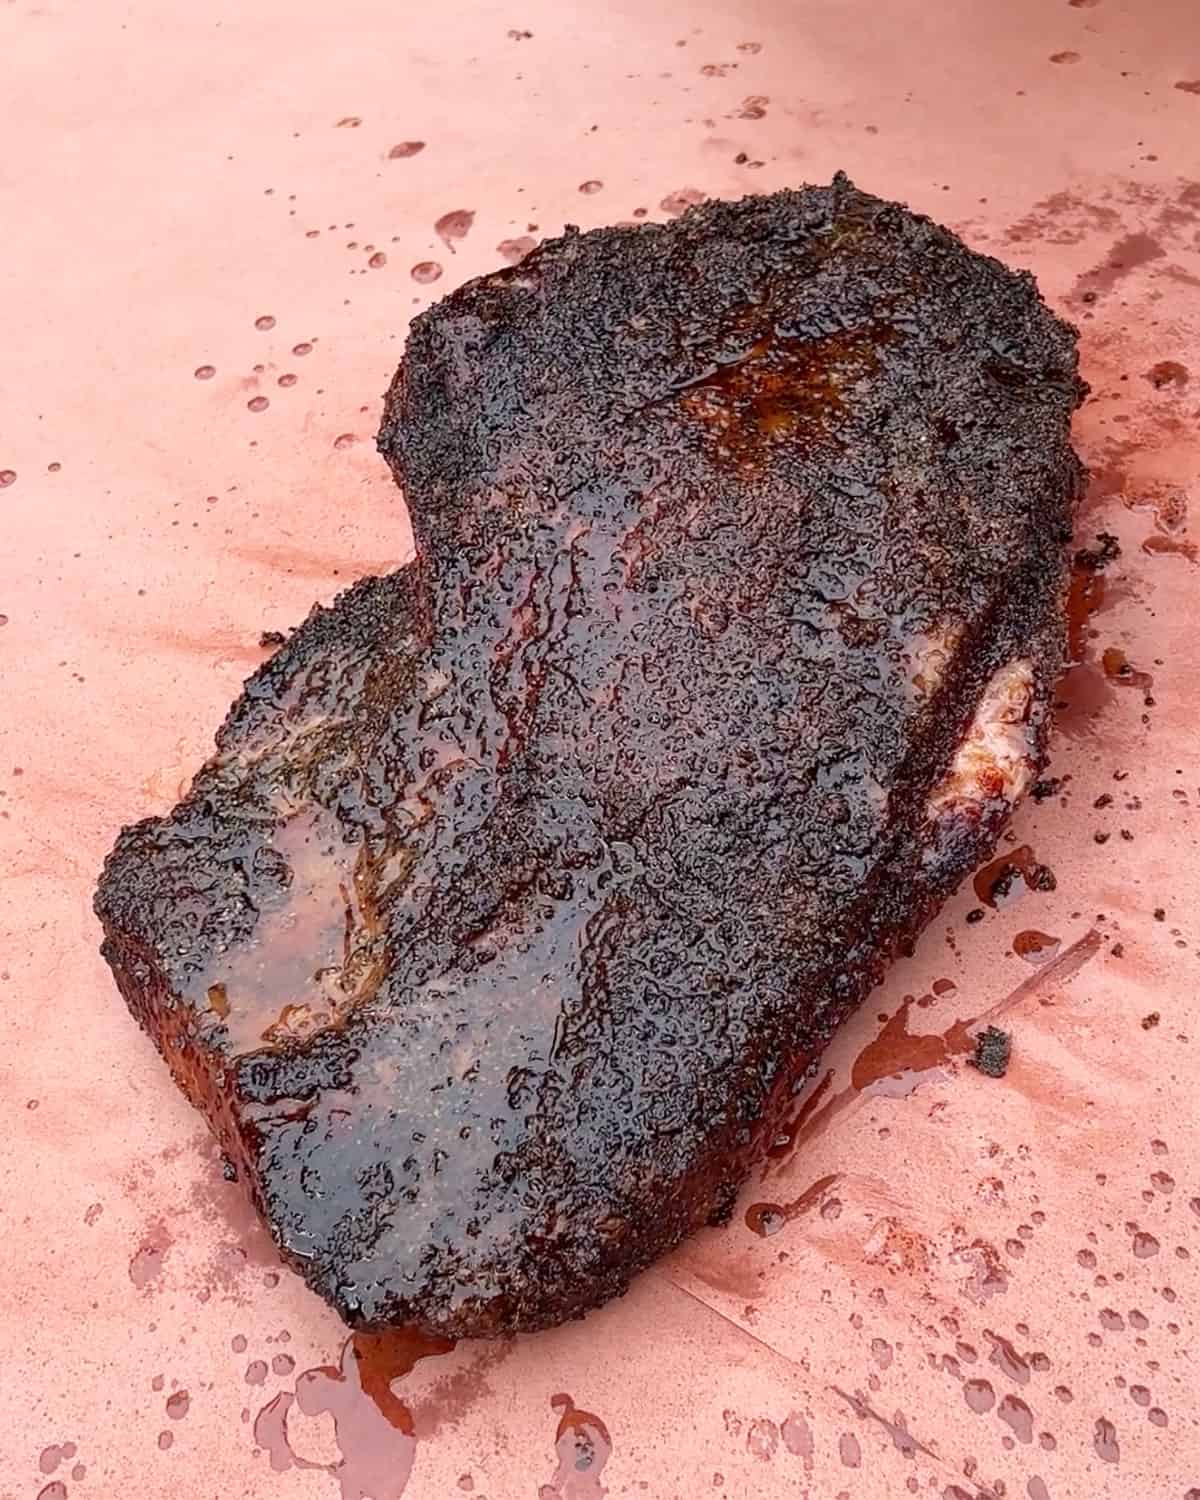 Smoked brisket on butcher paper spritzed with vinegar and tallow.